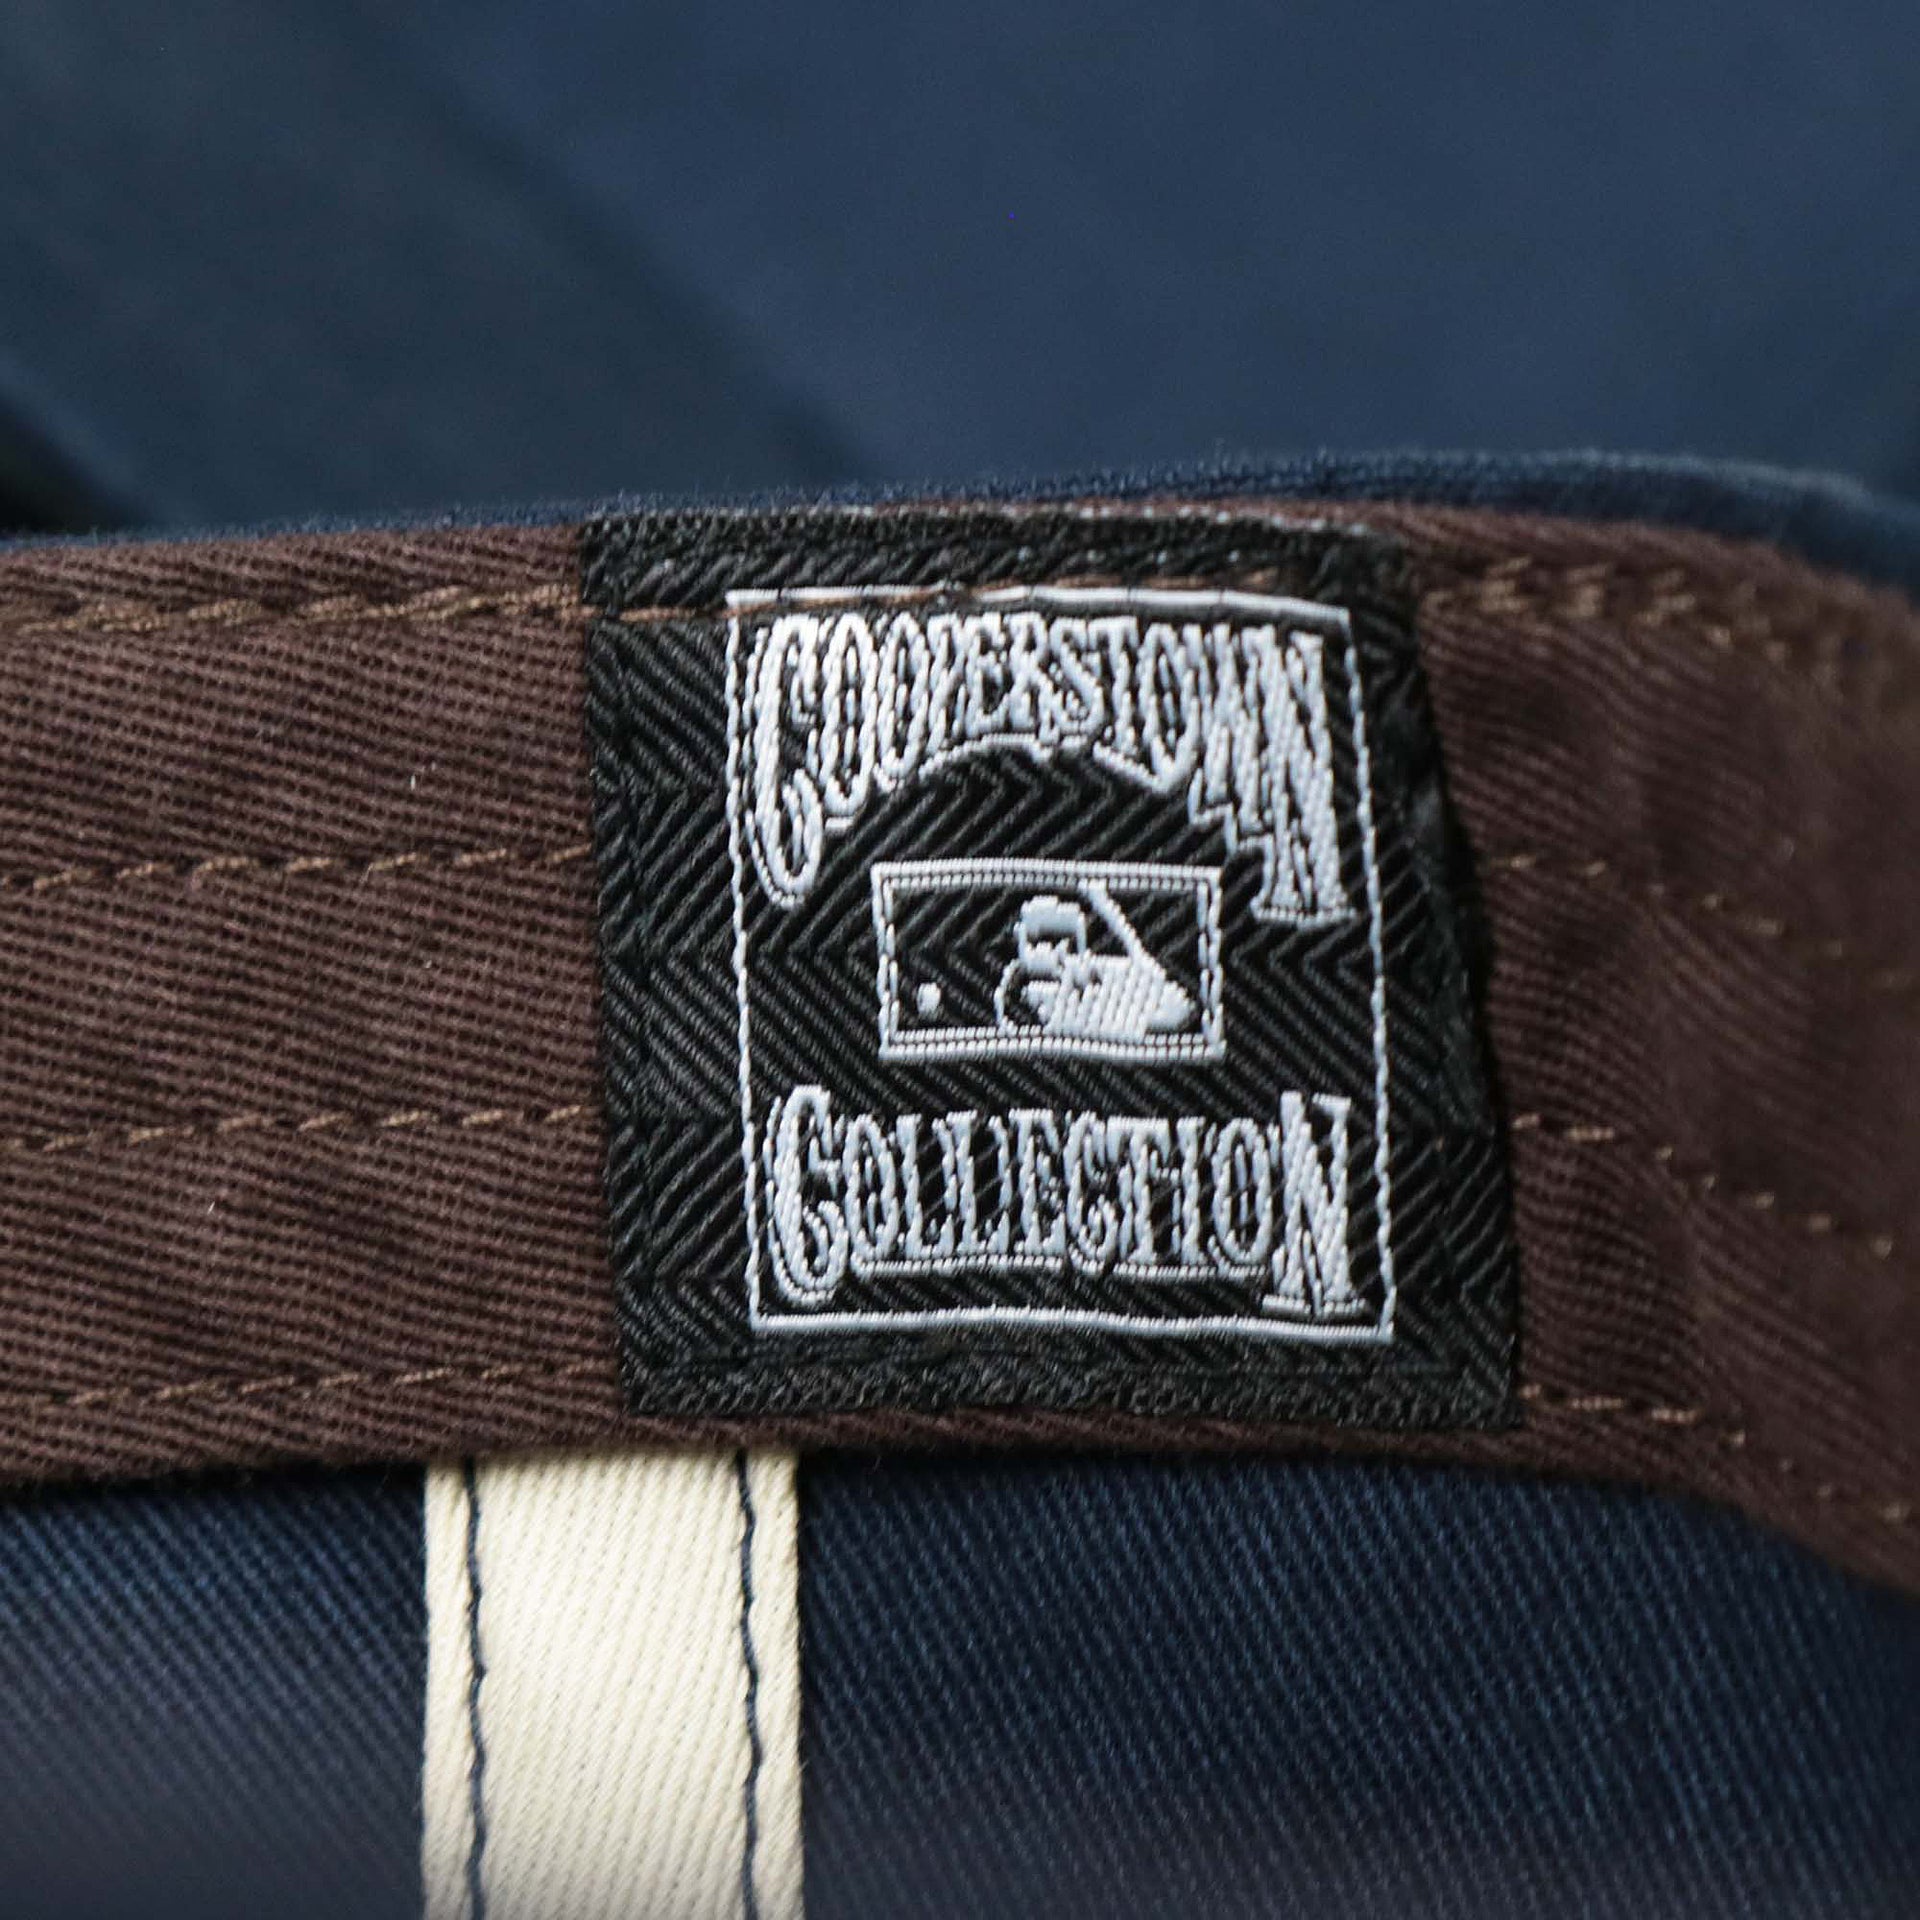 The Cooperstown Collection Logo on the Cooperstown New York Yankees Felt Yankees Logo Snapback Hat | Navy Snapback Cap